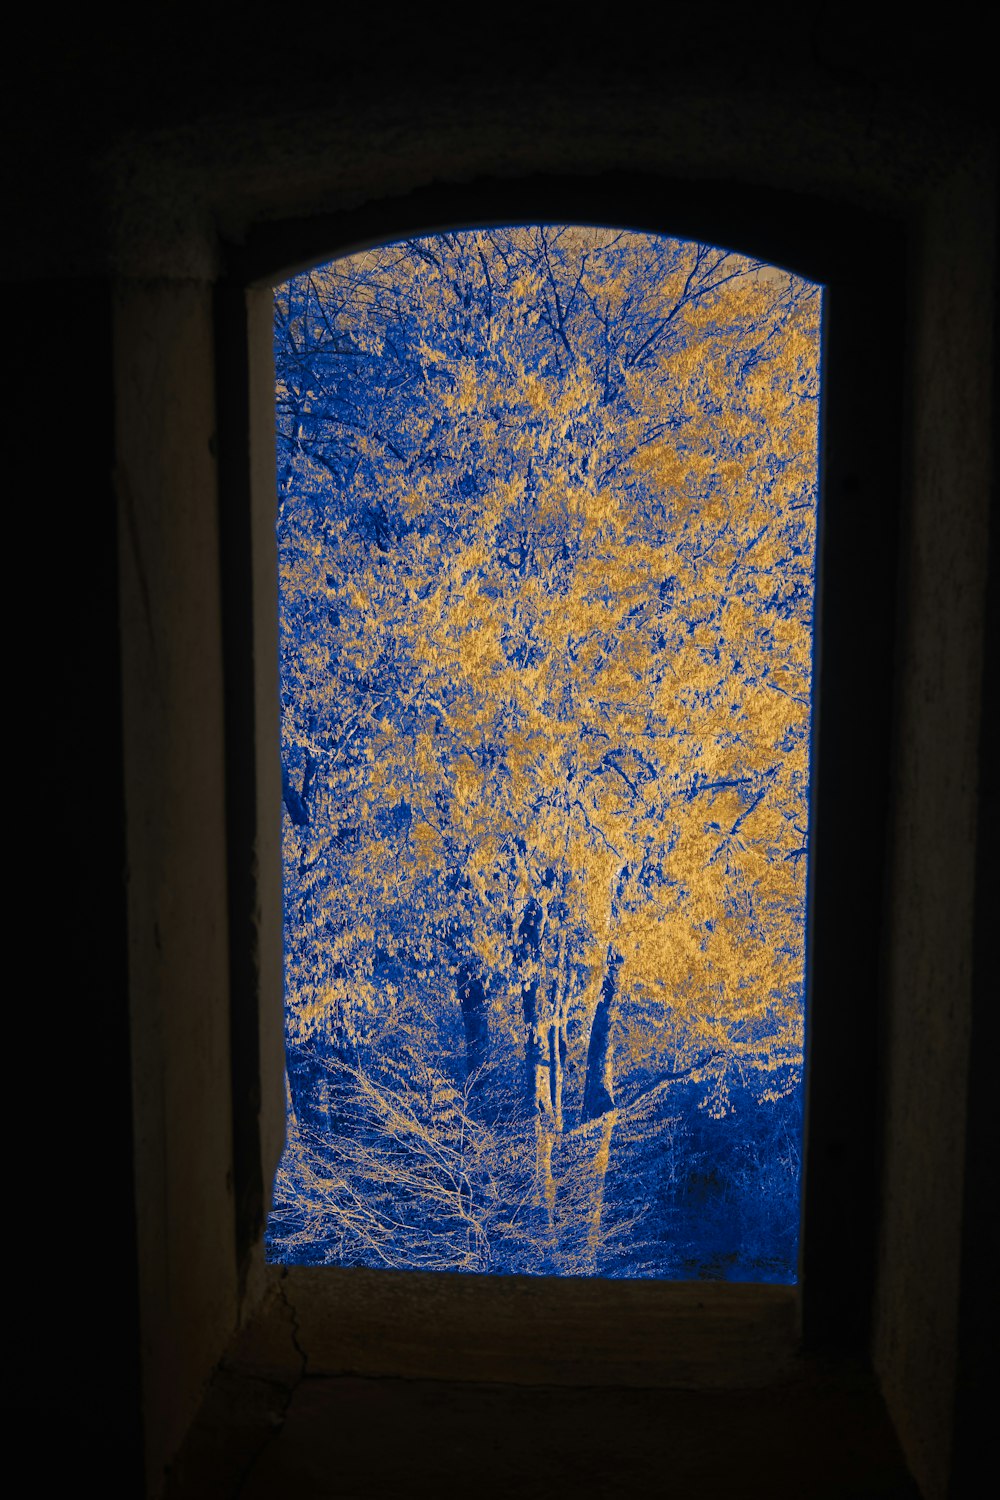 a tree seen through a window in a building